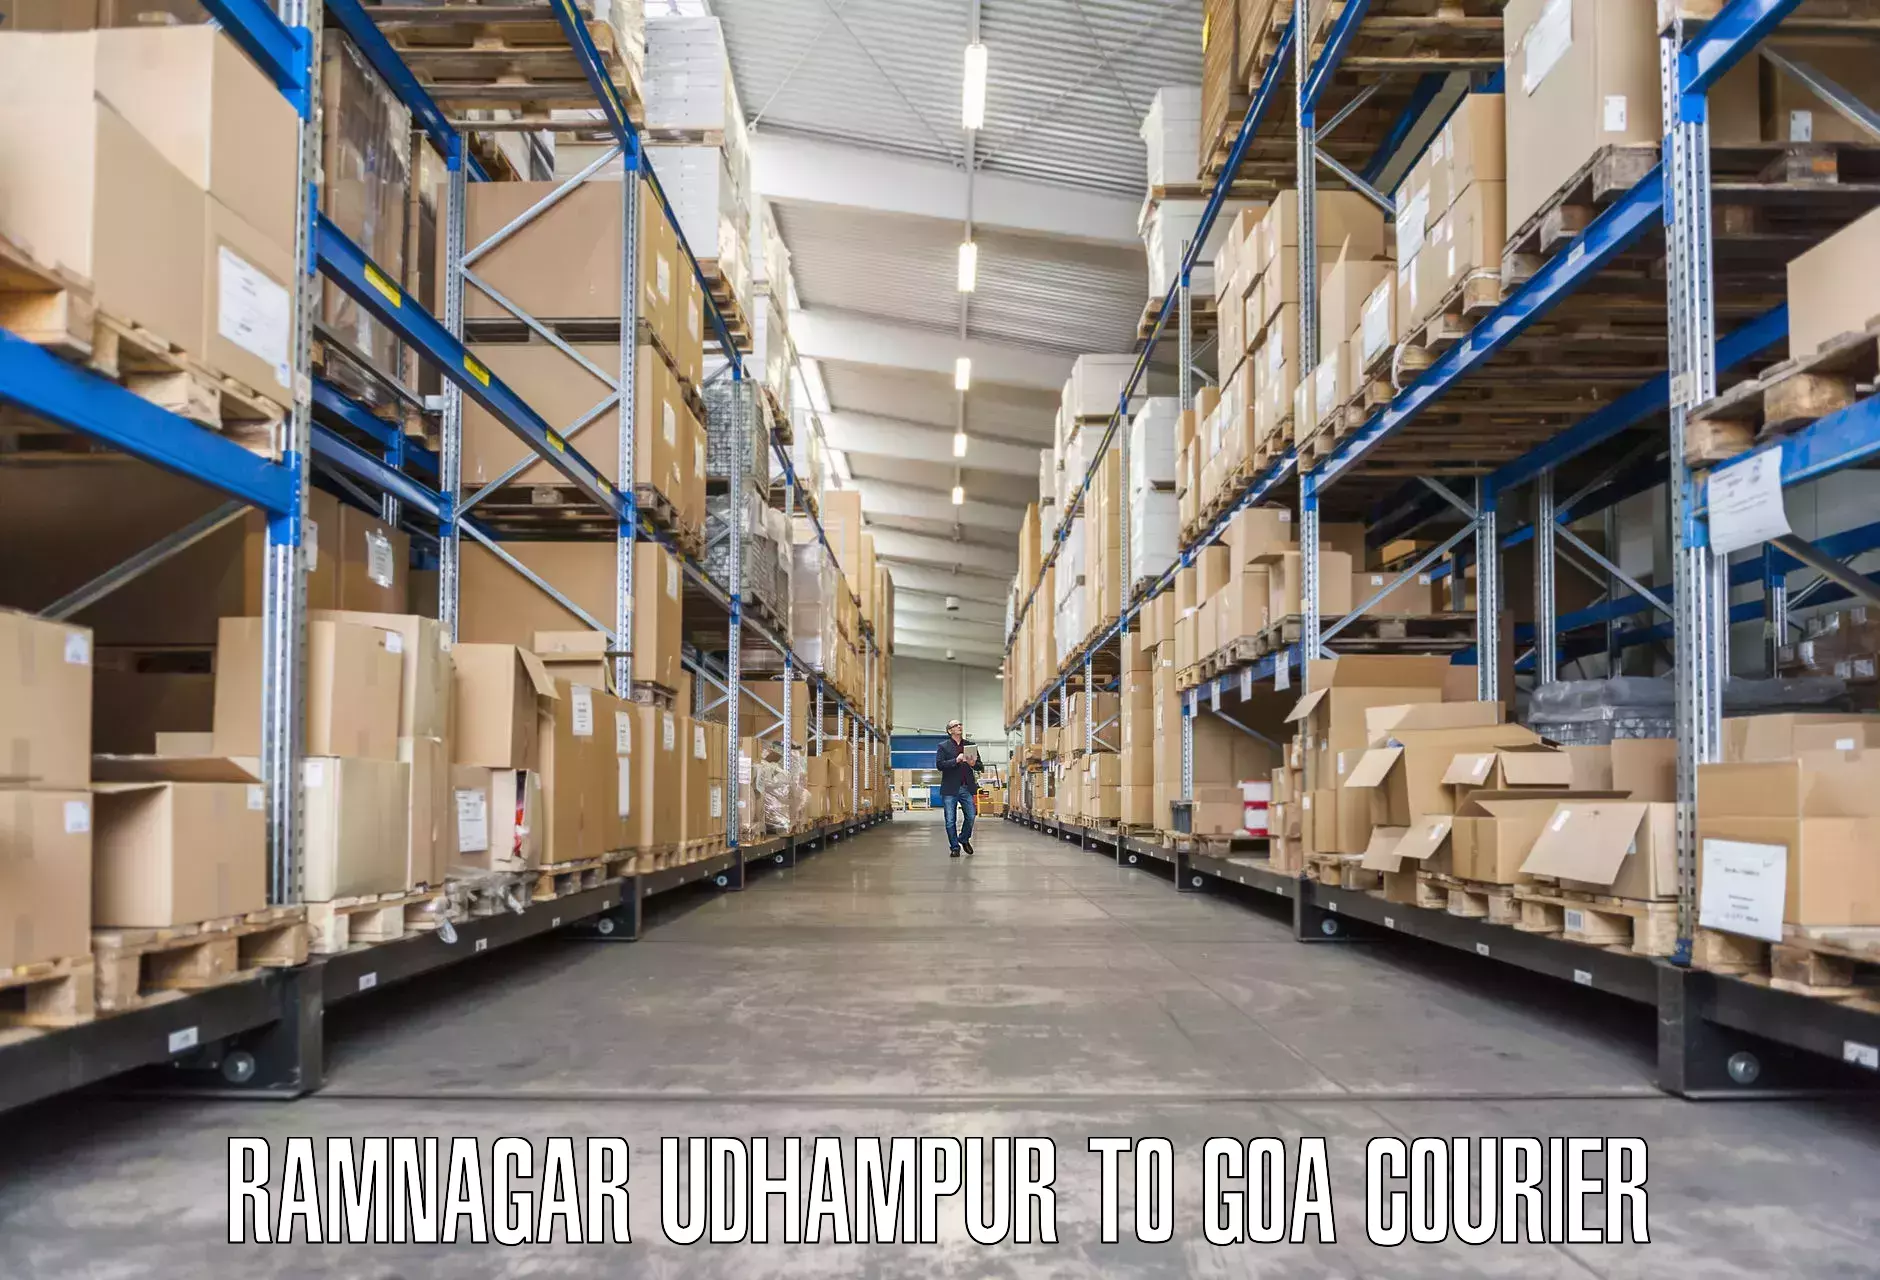 Packing and moving services in Ramnagar Udhampur to Goa